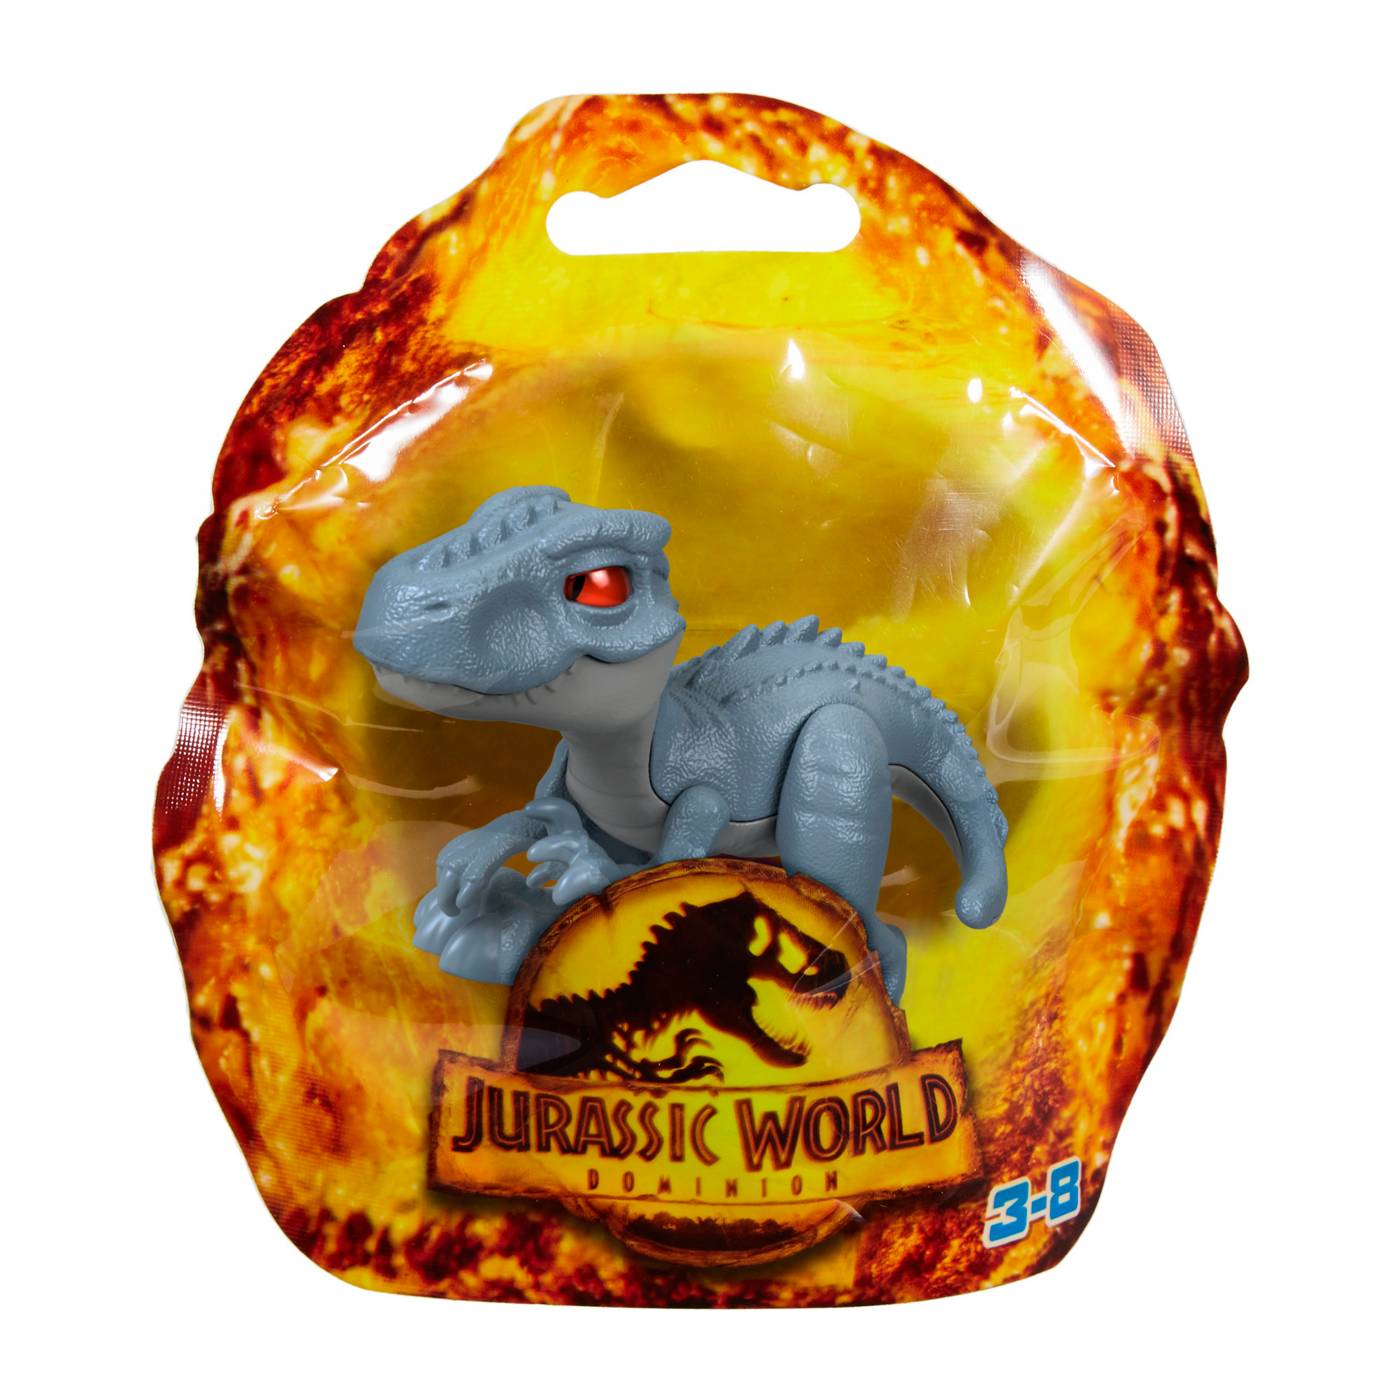 Imaginext Jurassic World Dominion Baby Dino - Assorted; image 1 of 2